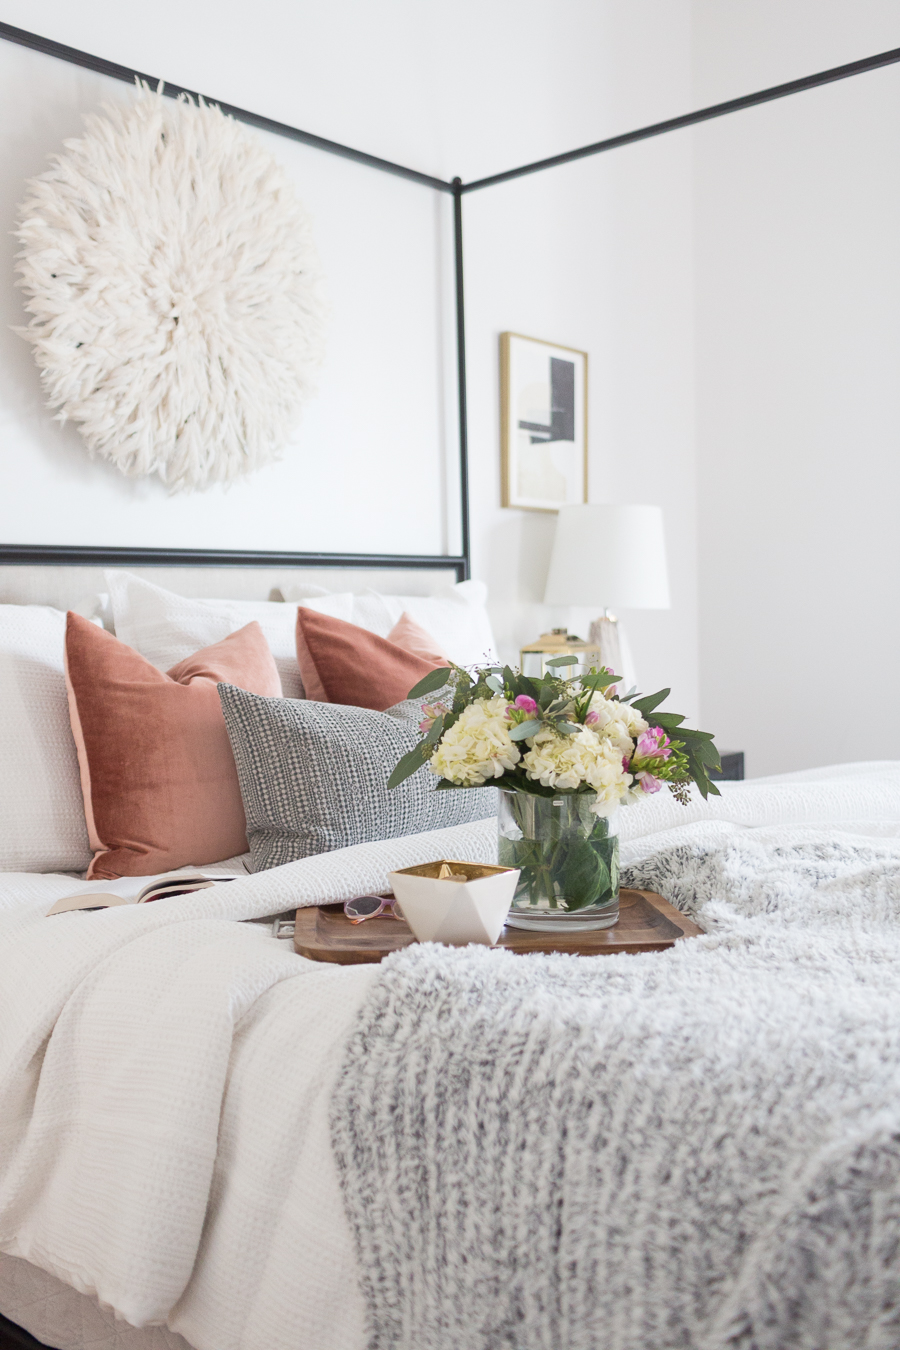 Refresh Your Master Bedroom and Bath with Pottery Barn with wooden tray sitting on top of bed with hydrangeas in a vase and white poof on the wall 